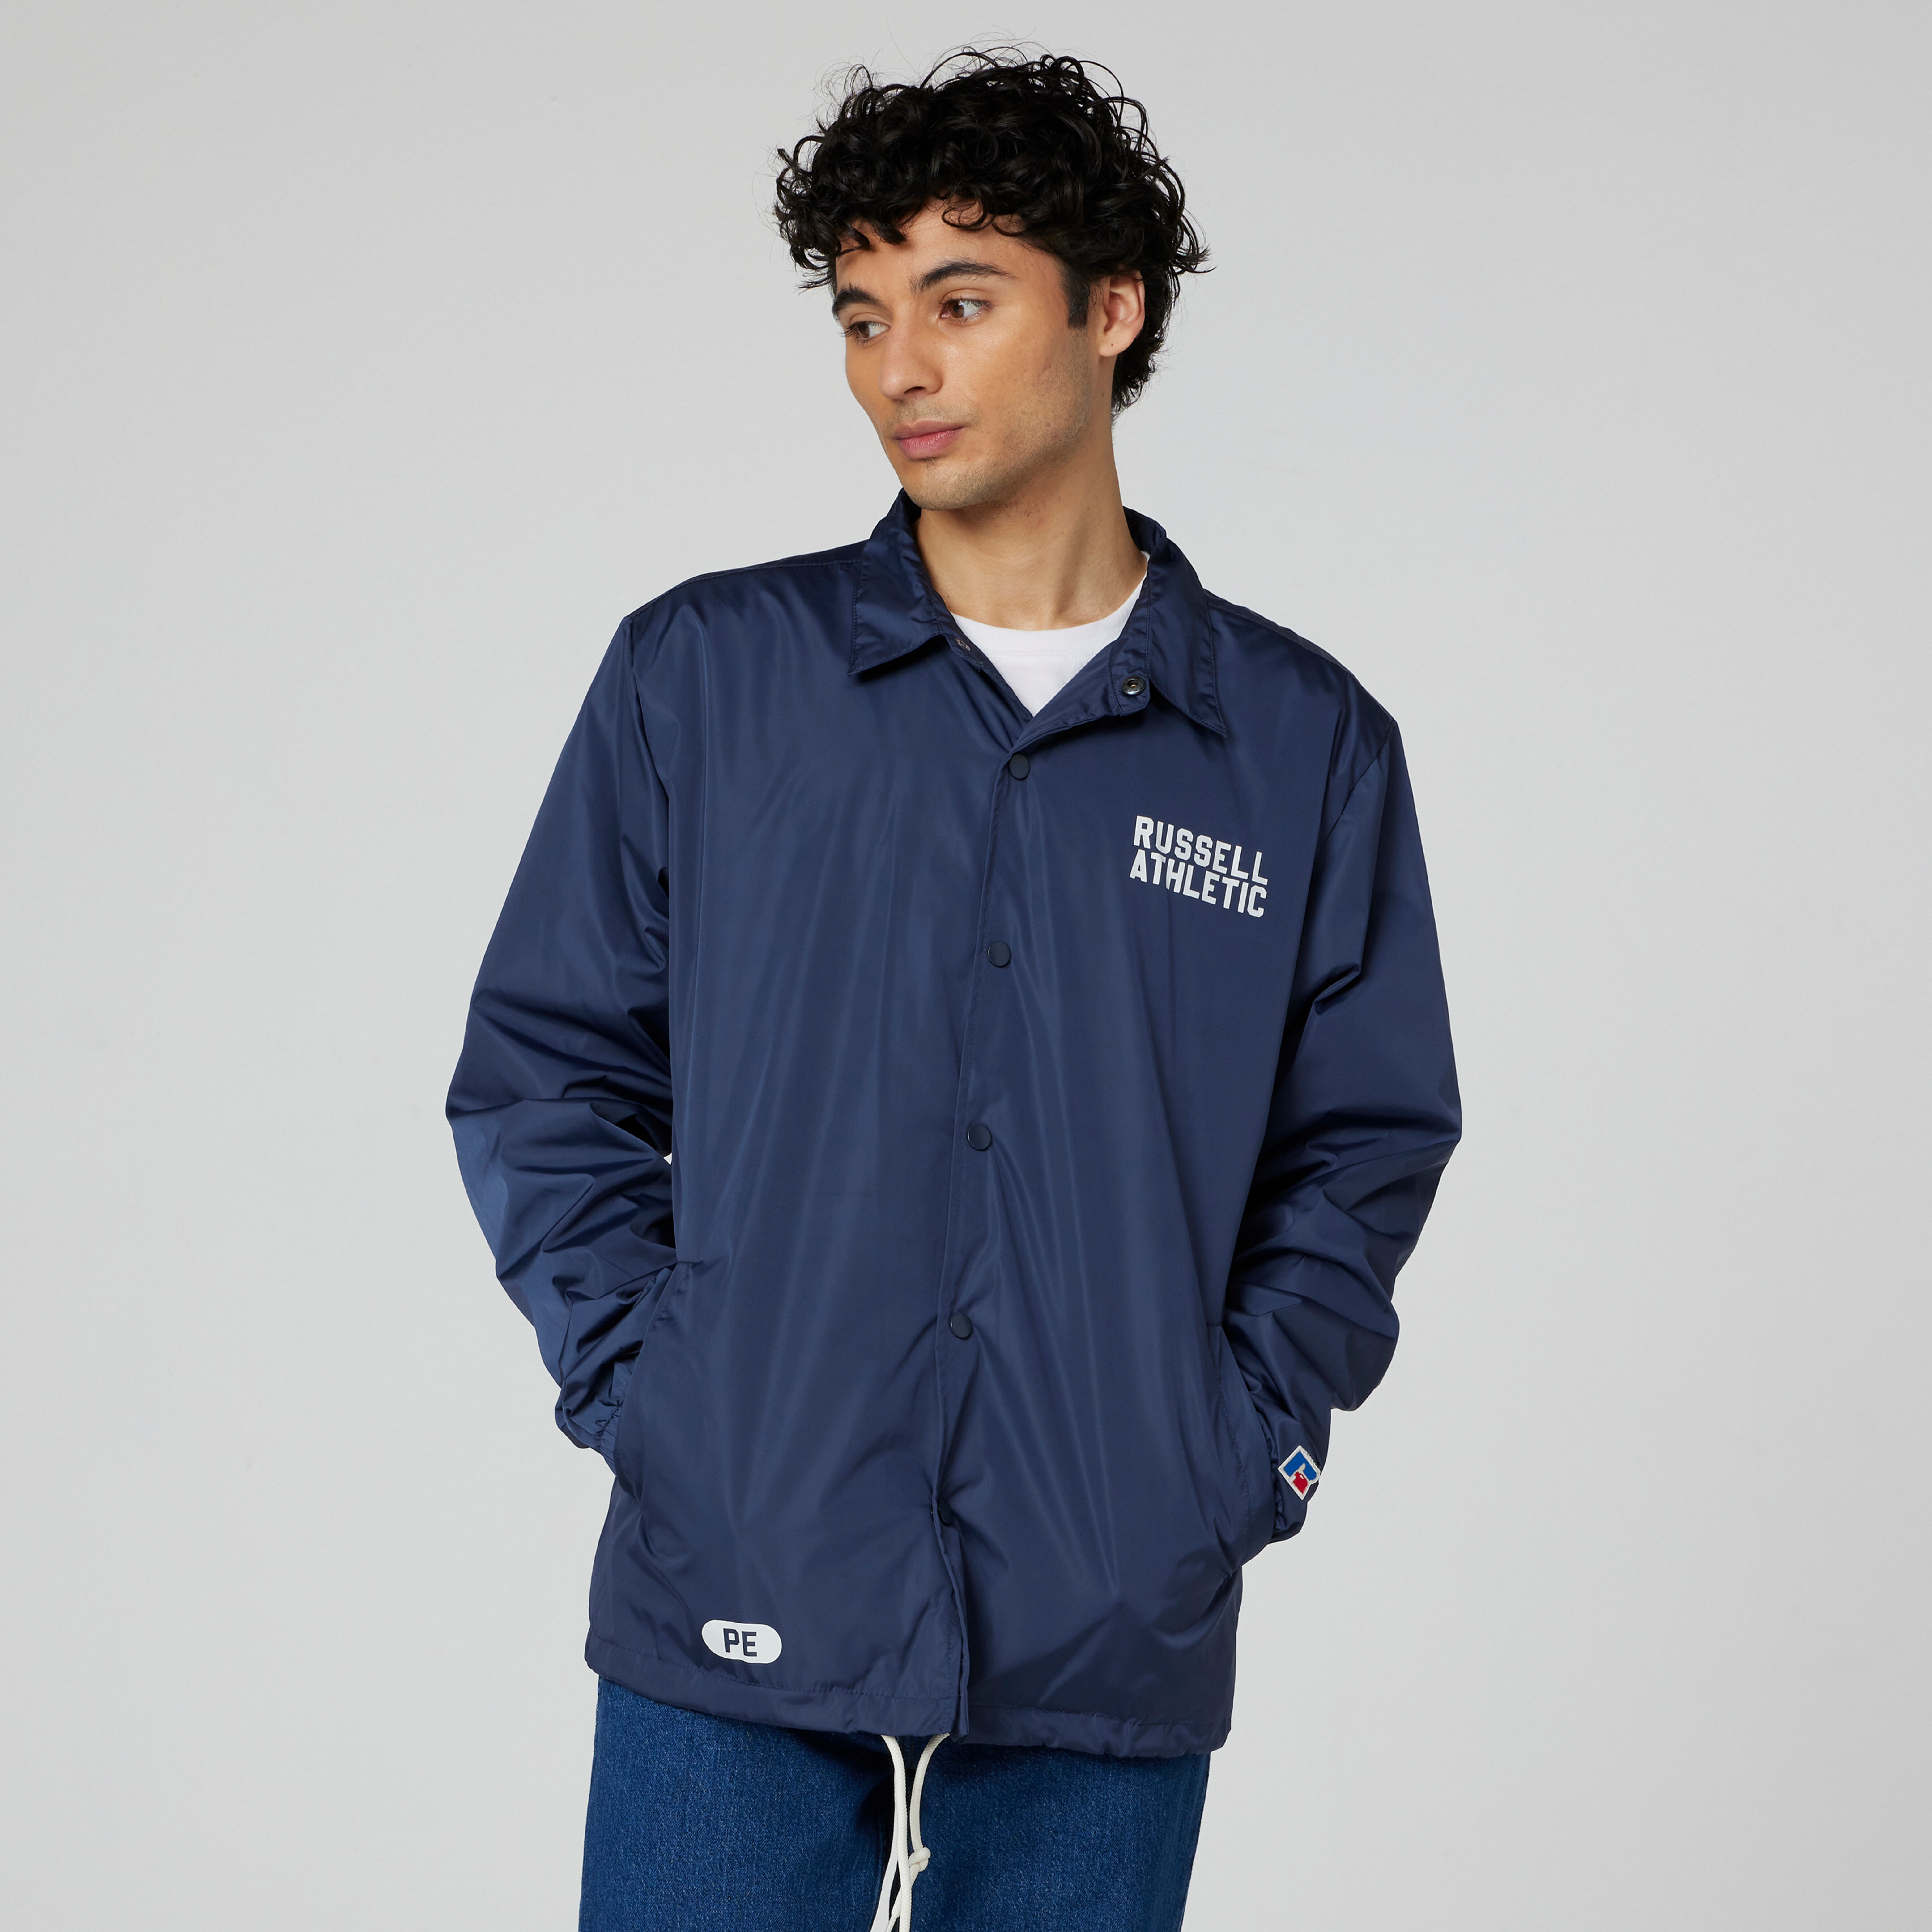 Russell Athletic Men's Coaches Jacket l Russell Athletic.com